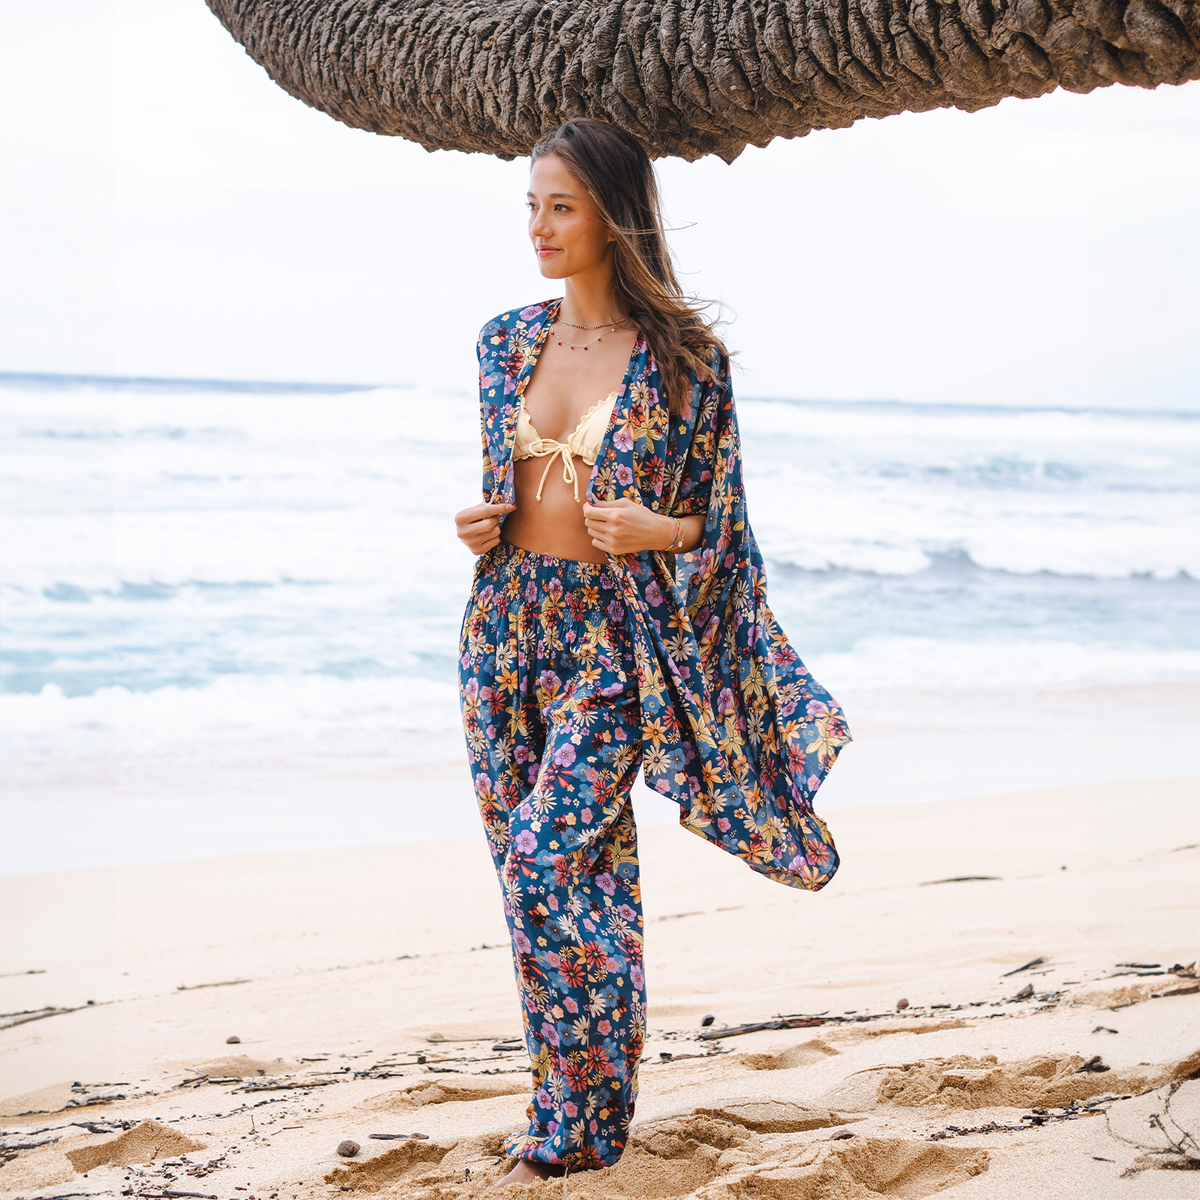 Model standing on the beach wearing blue, pink, orange and yellow floral print harem pants and a matching kimono